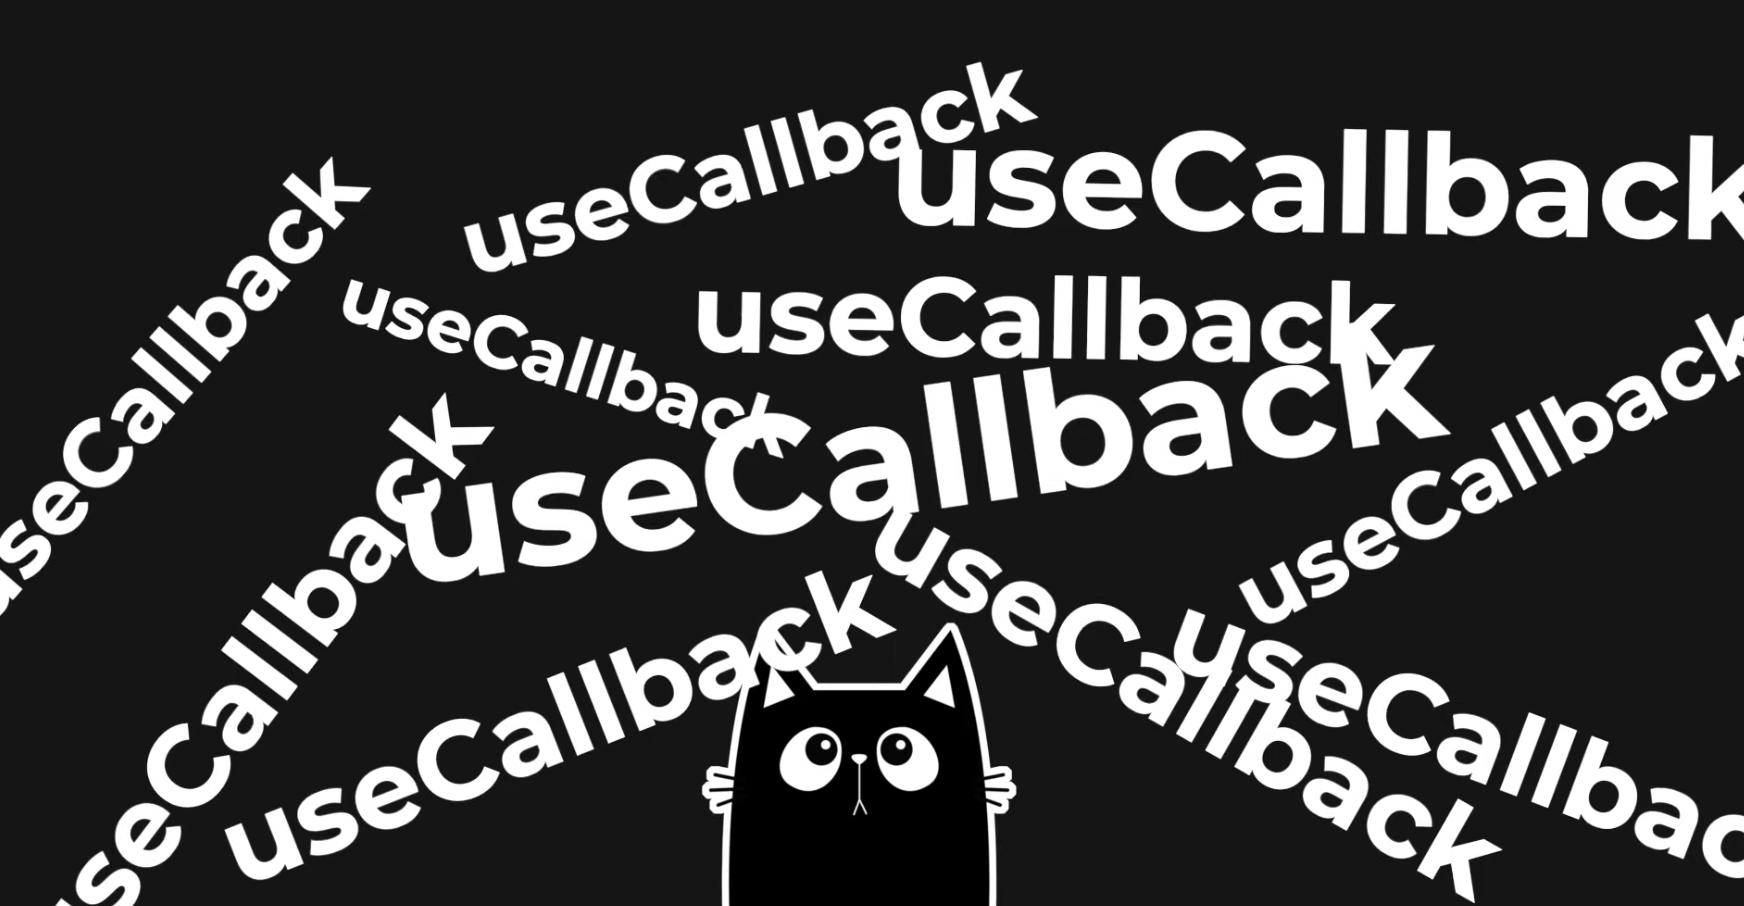 A cat standing between many "useCallback" text chunks.